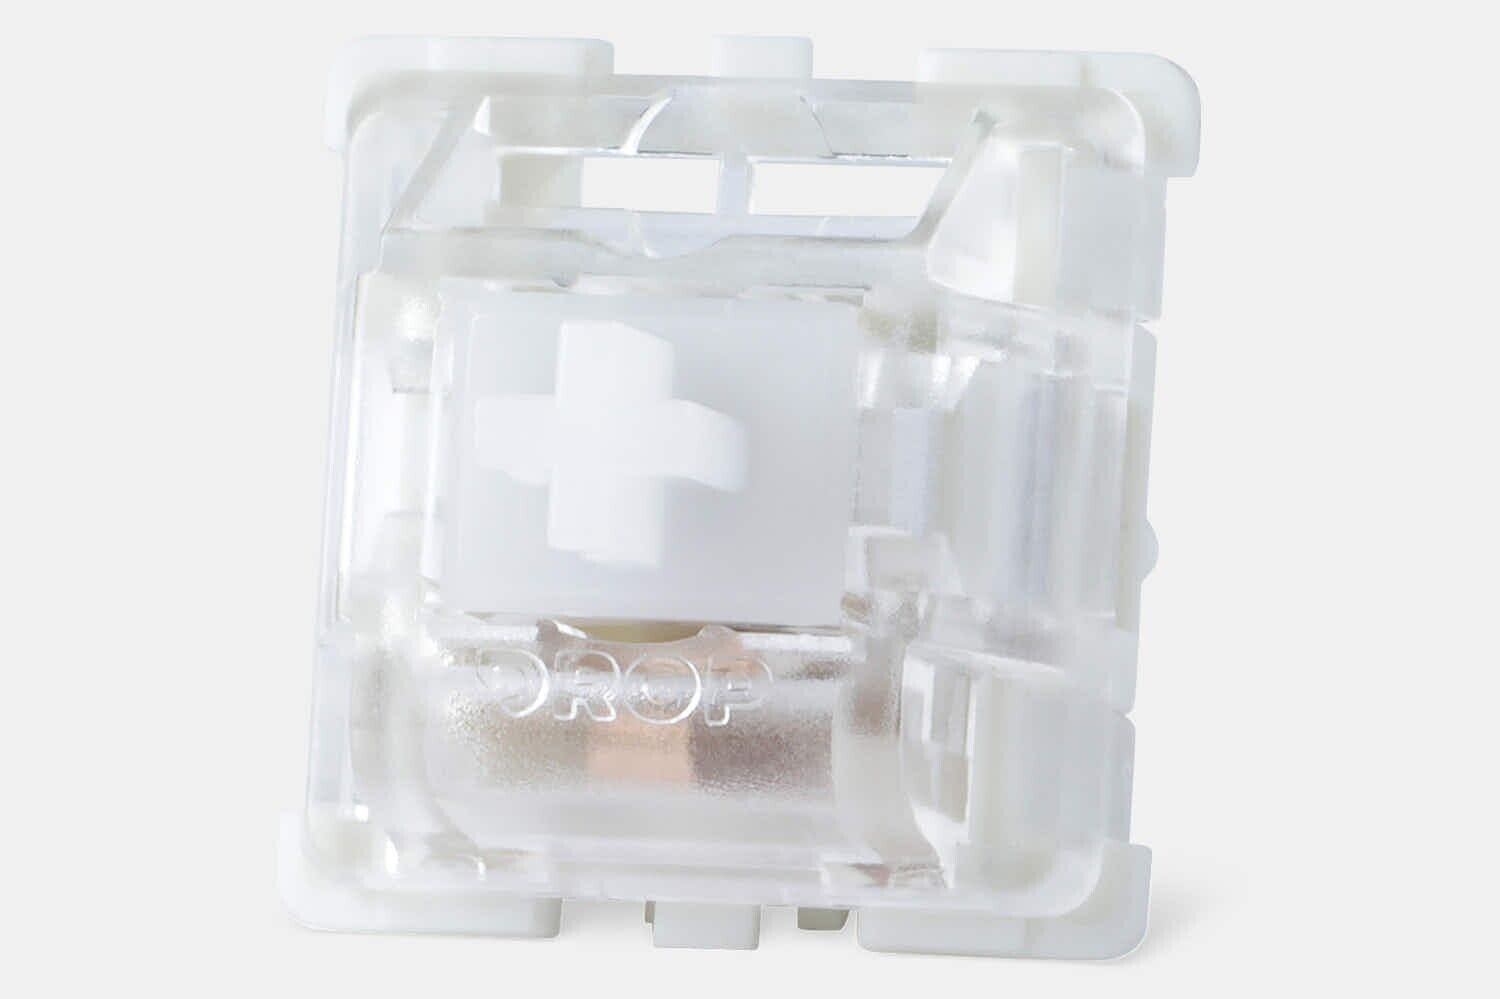 New Sealed Drop Holy Panda X Clear Mechanical Switches, 5 Pin 35 Pack $35 MSRP